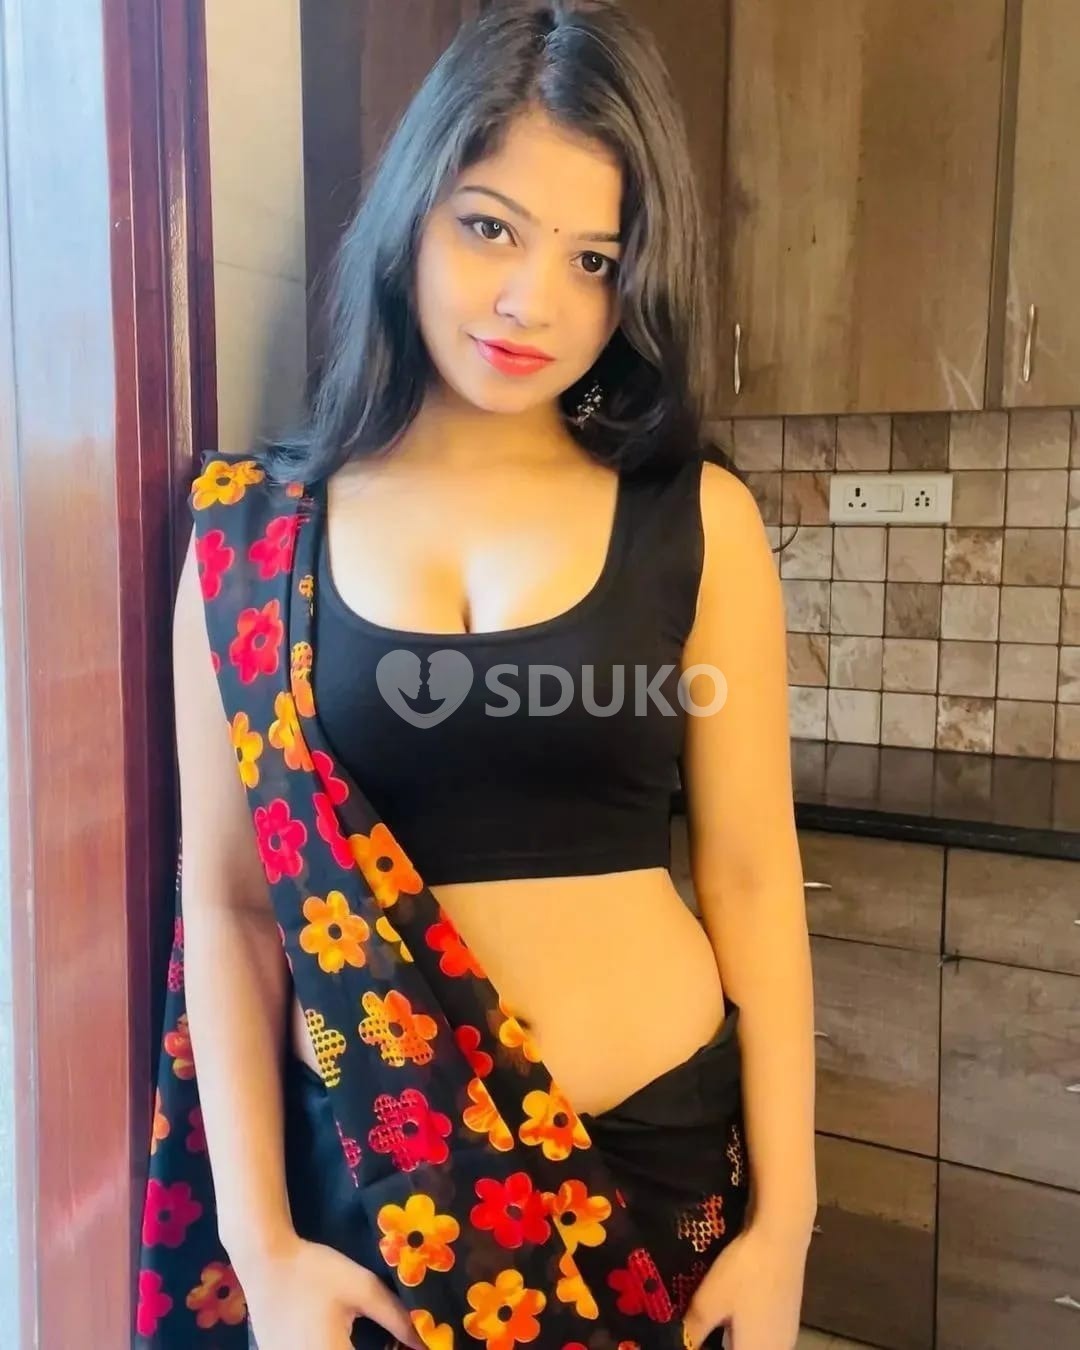 ®{HADAPSAR PUNE}❣️BEST VIP HOT COLLEGE GIRL GENUINE SERVICE PROVIDE UNLIMITED SHOTS ALL TYPE SEX ALLOW BOOK NOW ANY